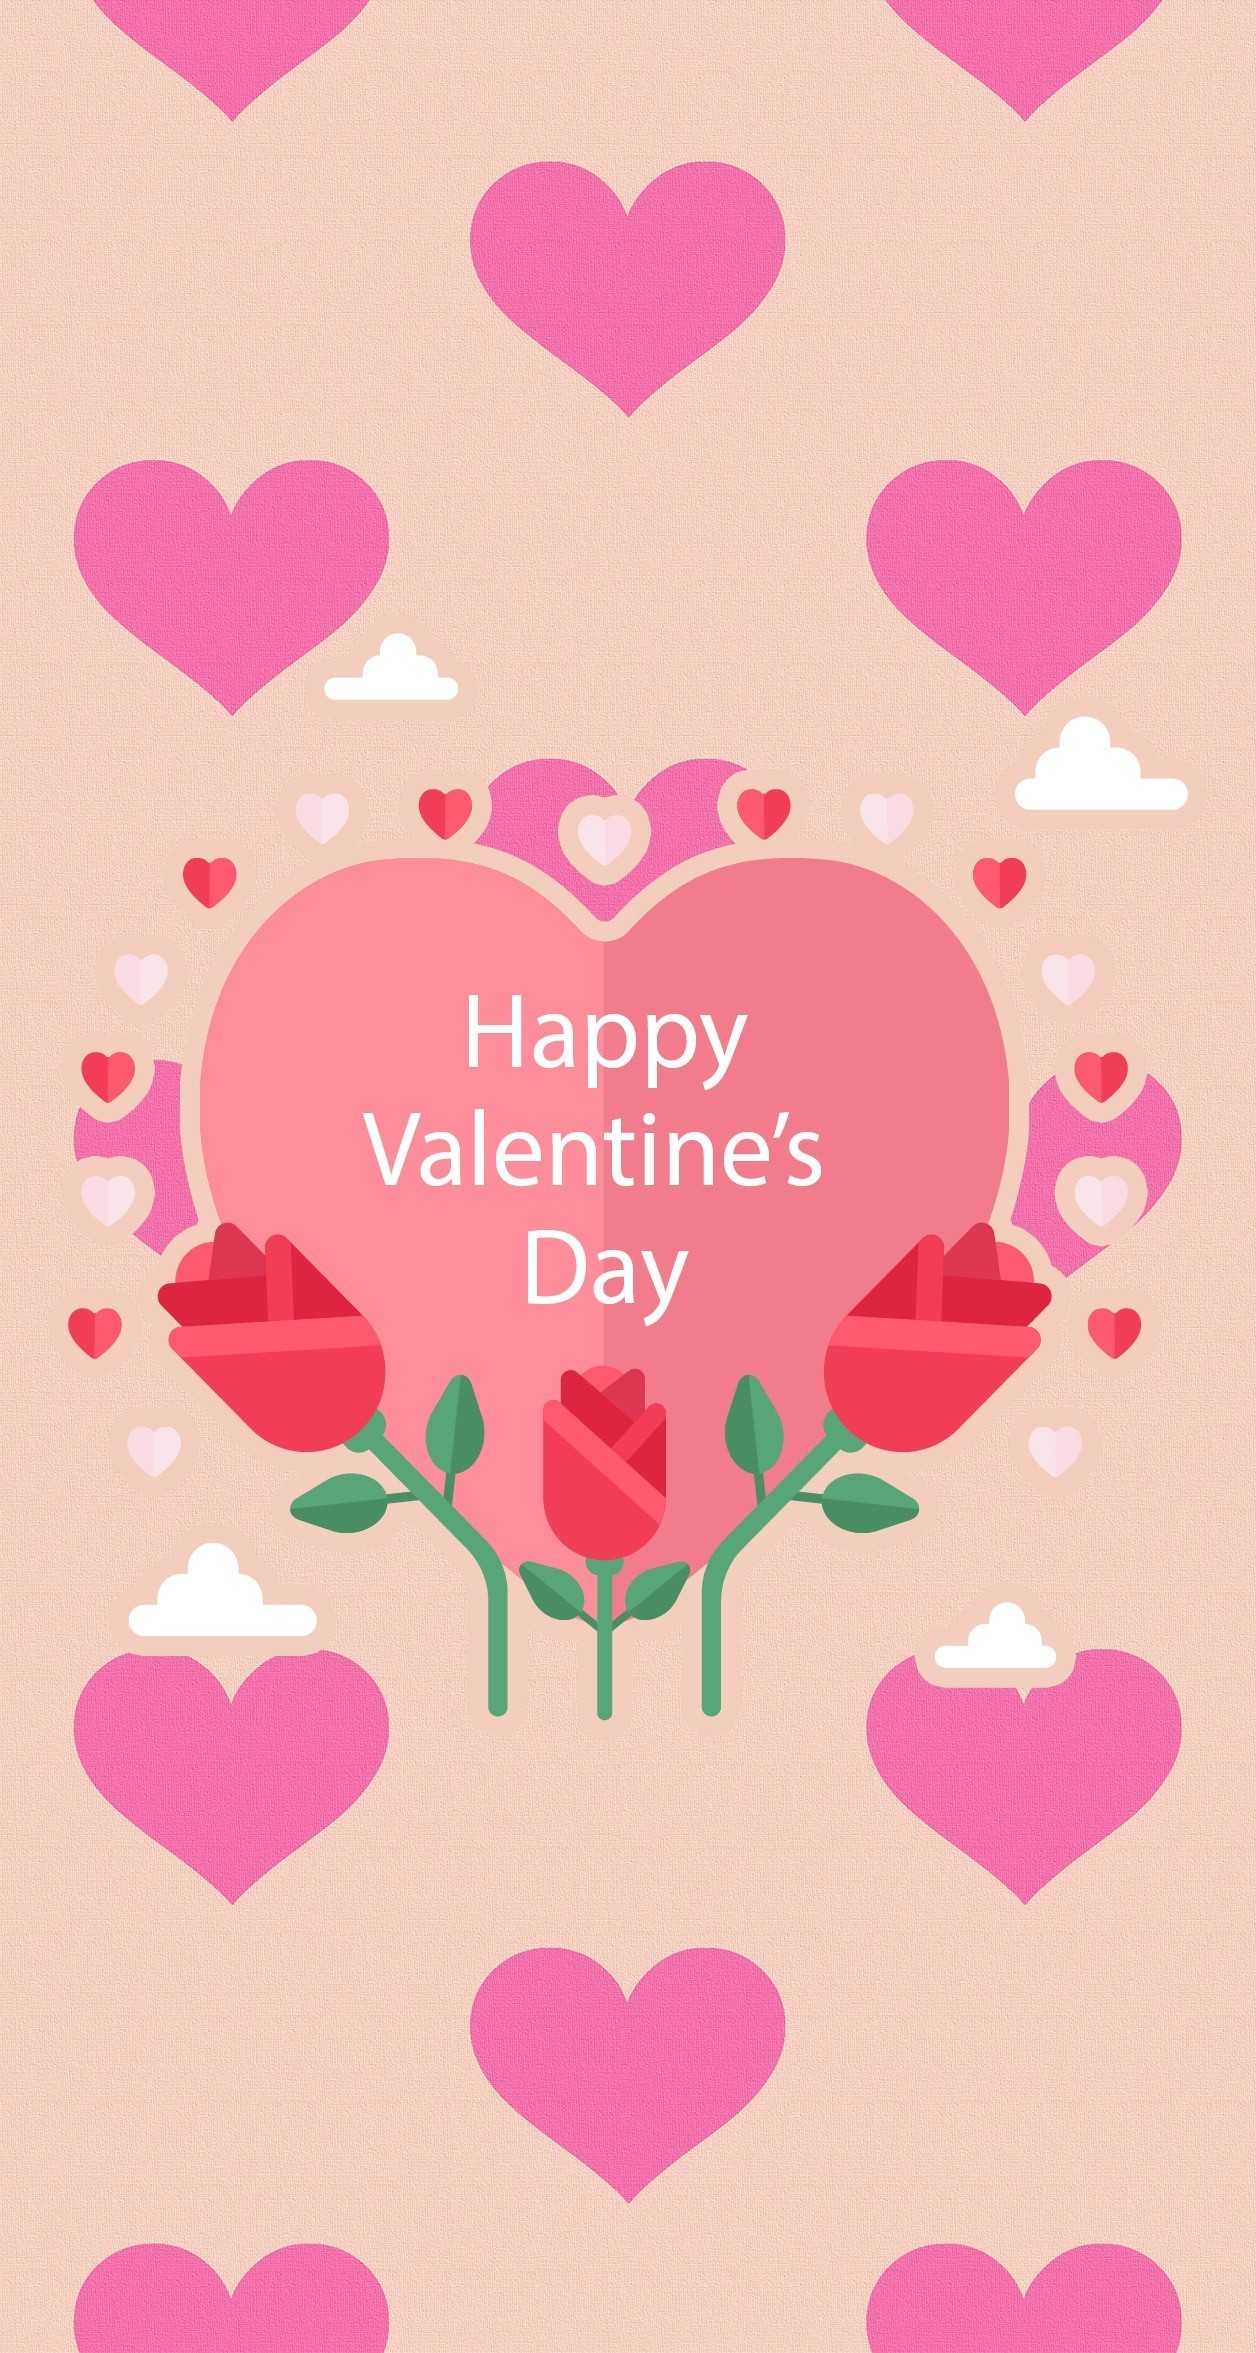 Valentine Hearts and Happy Valentines Day Text. Valentines Day Wallpaper  Stock Illustration - Illustration of background, lettering: 135373819